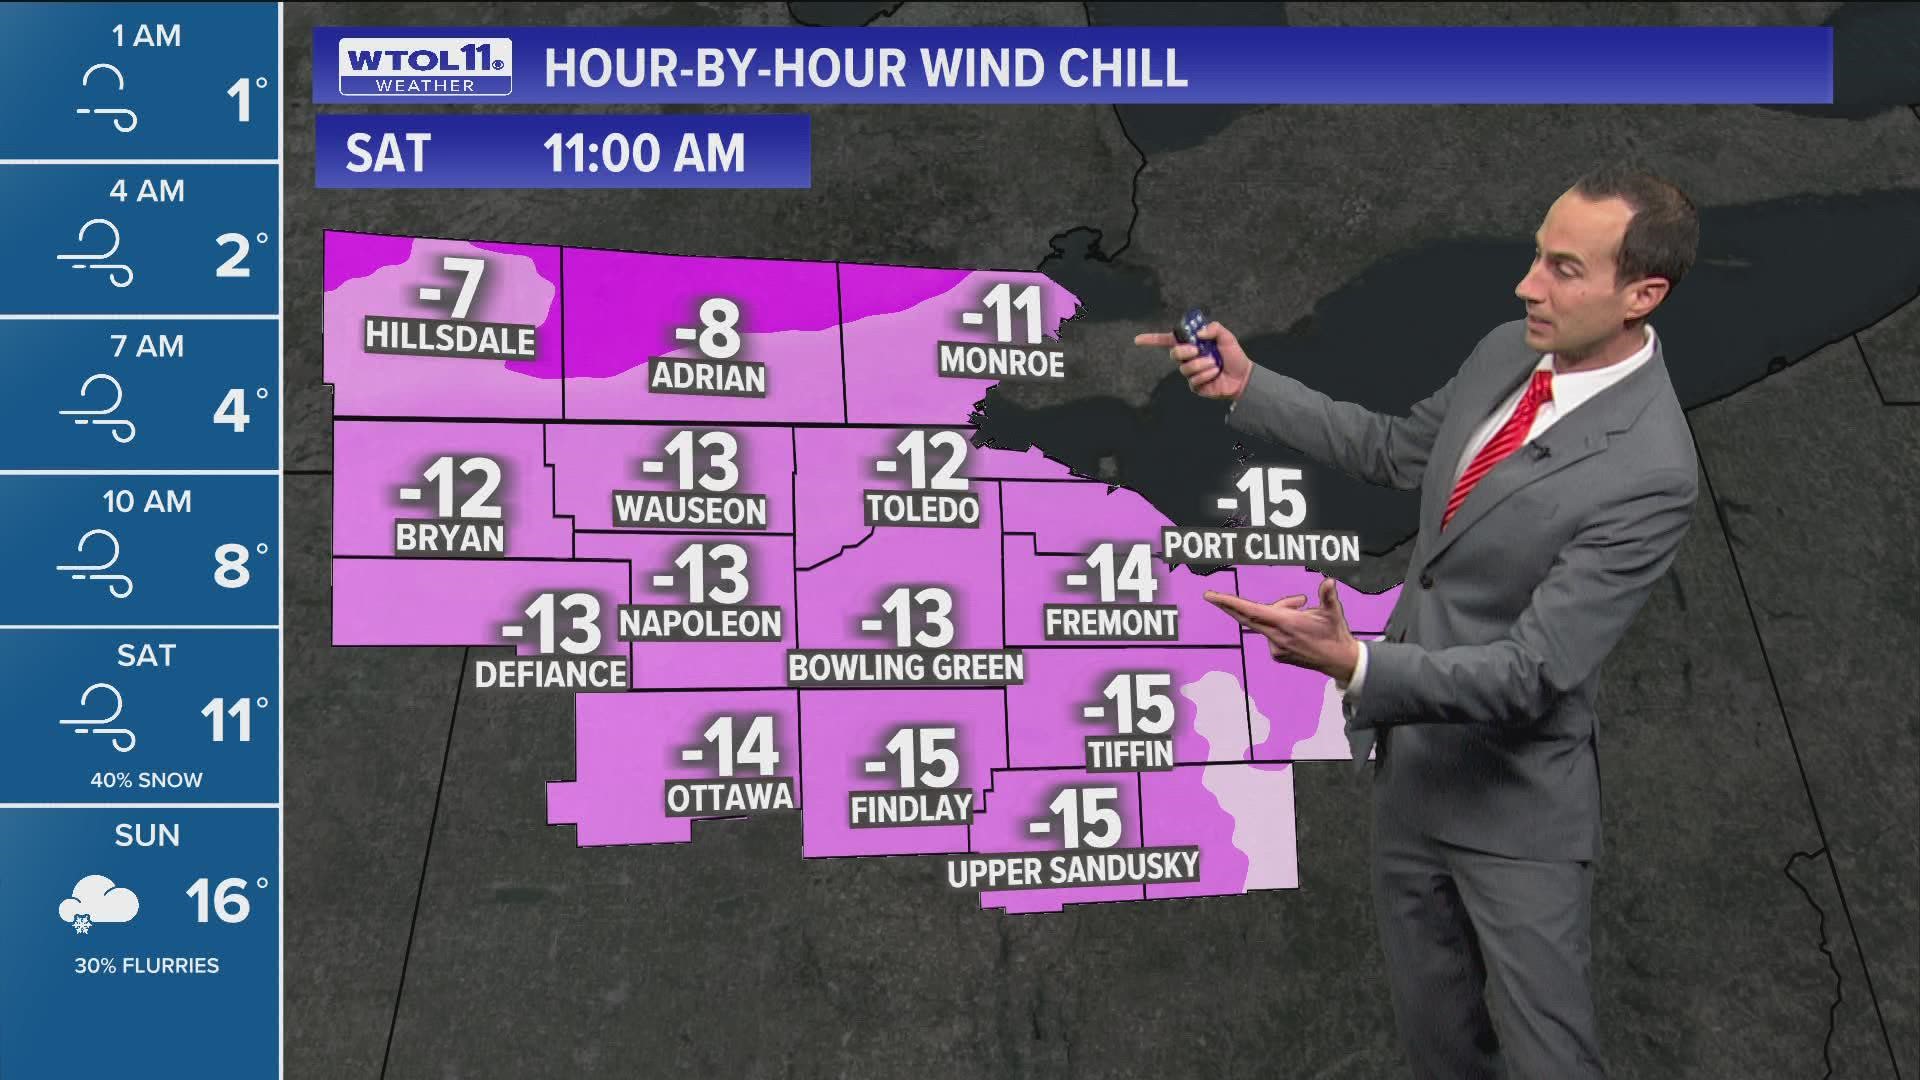 Lows will hover near or below zero with wind chills of minus 20-25 degrees.